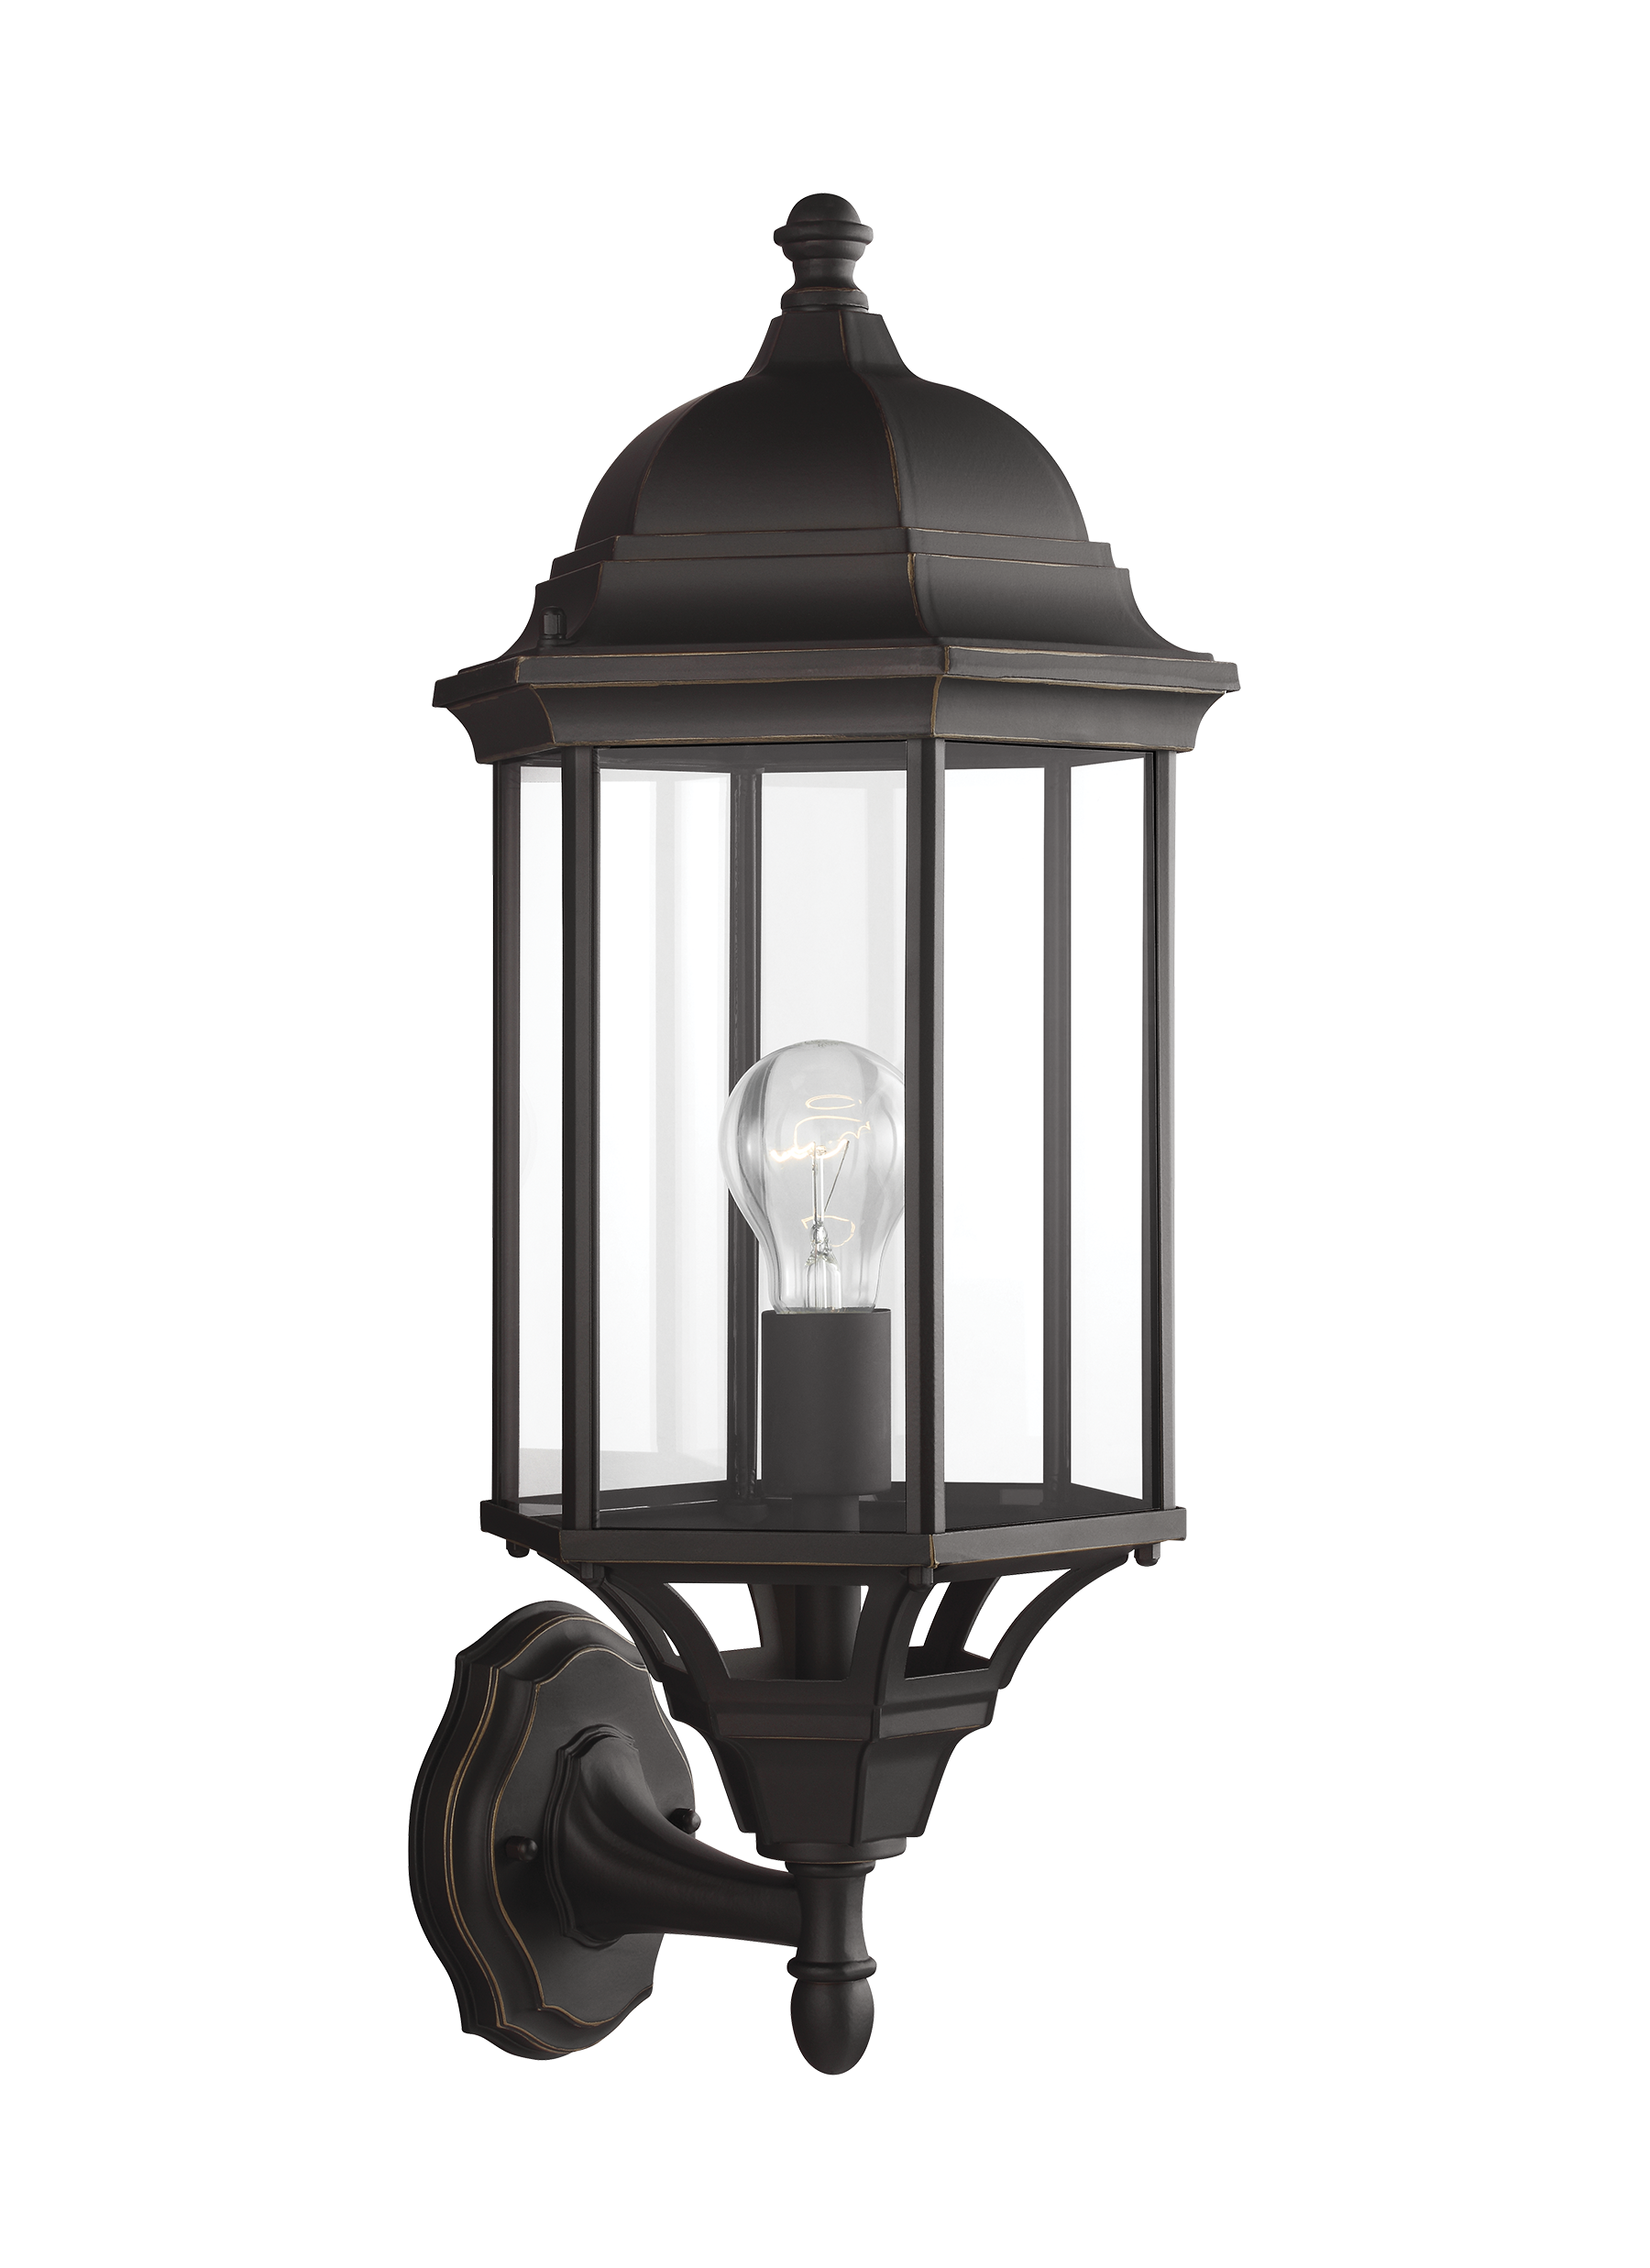 Sevier traditional 1-light outdoor exterior large uplight outdoor wall lantern sconce in antique bronze finish with clear ...